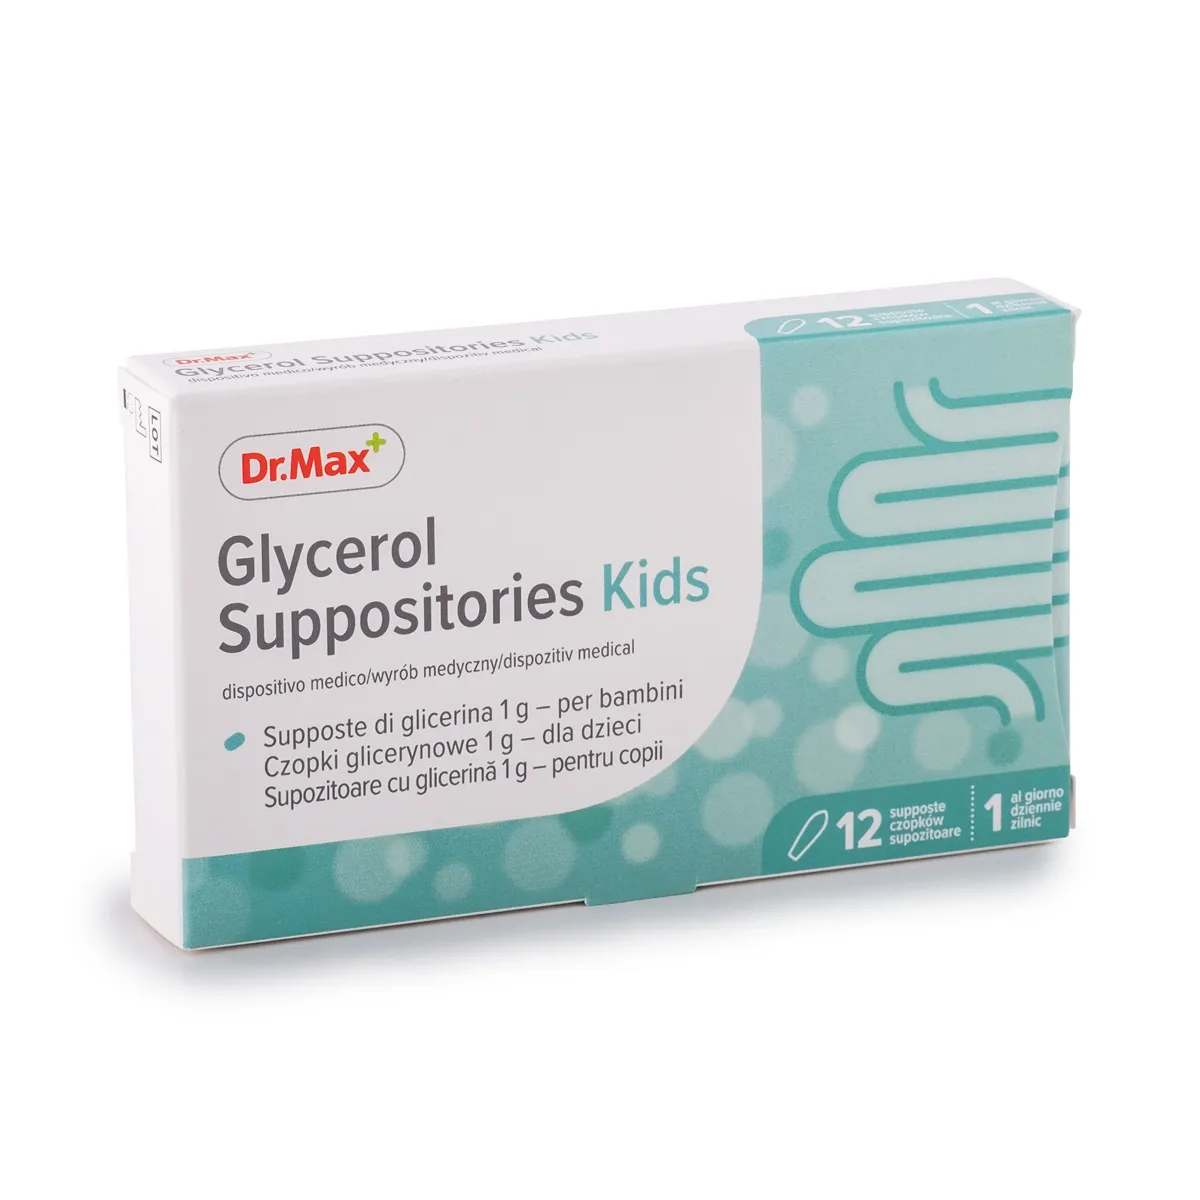 Dr.Max Glycerol Suppositories Kids 12 Supposte